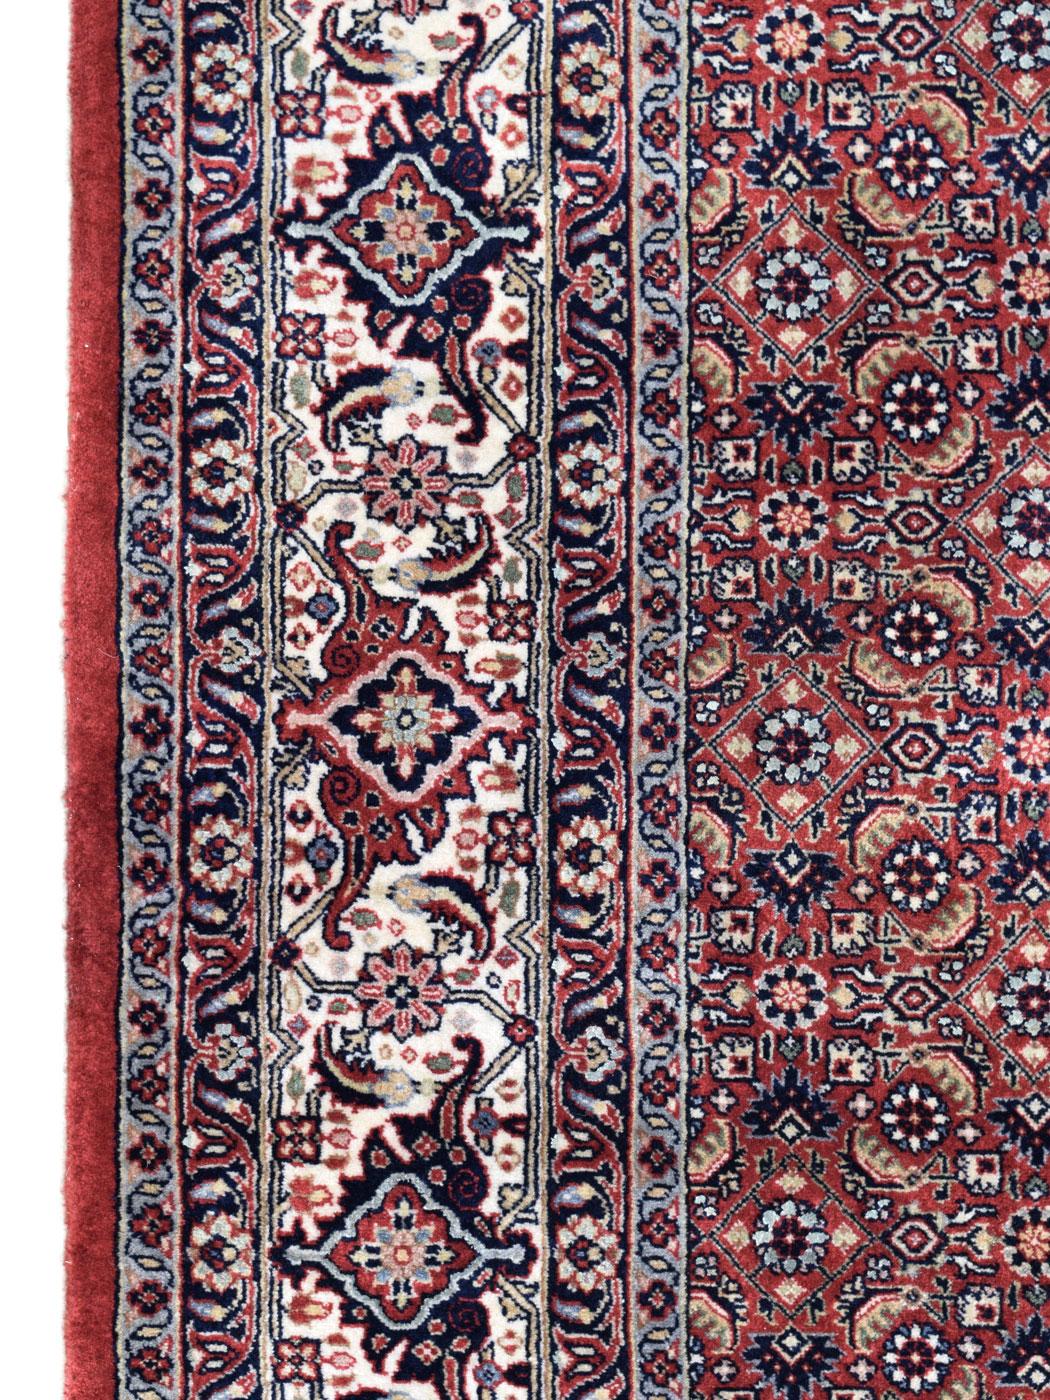 Vegetable Dyed Classic Hand-Knotted Bidjar Carpet in Red, Indigo, and Cream Wool, 5' x 7' For Sale